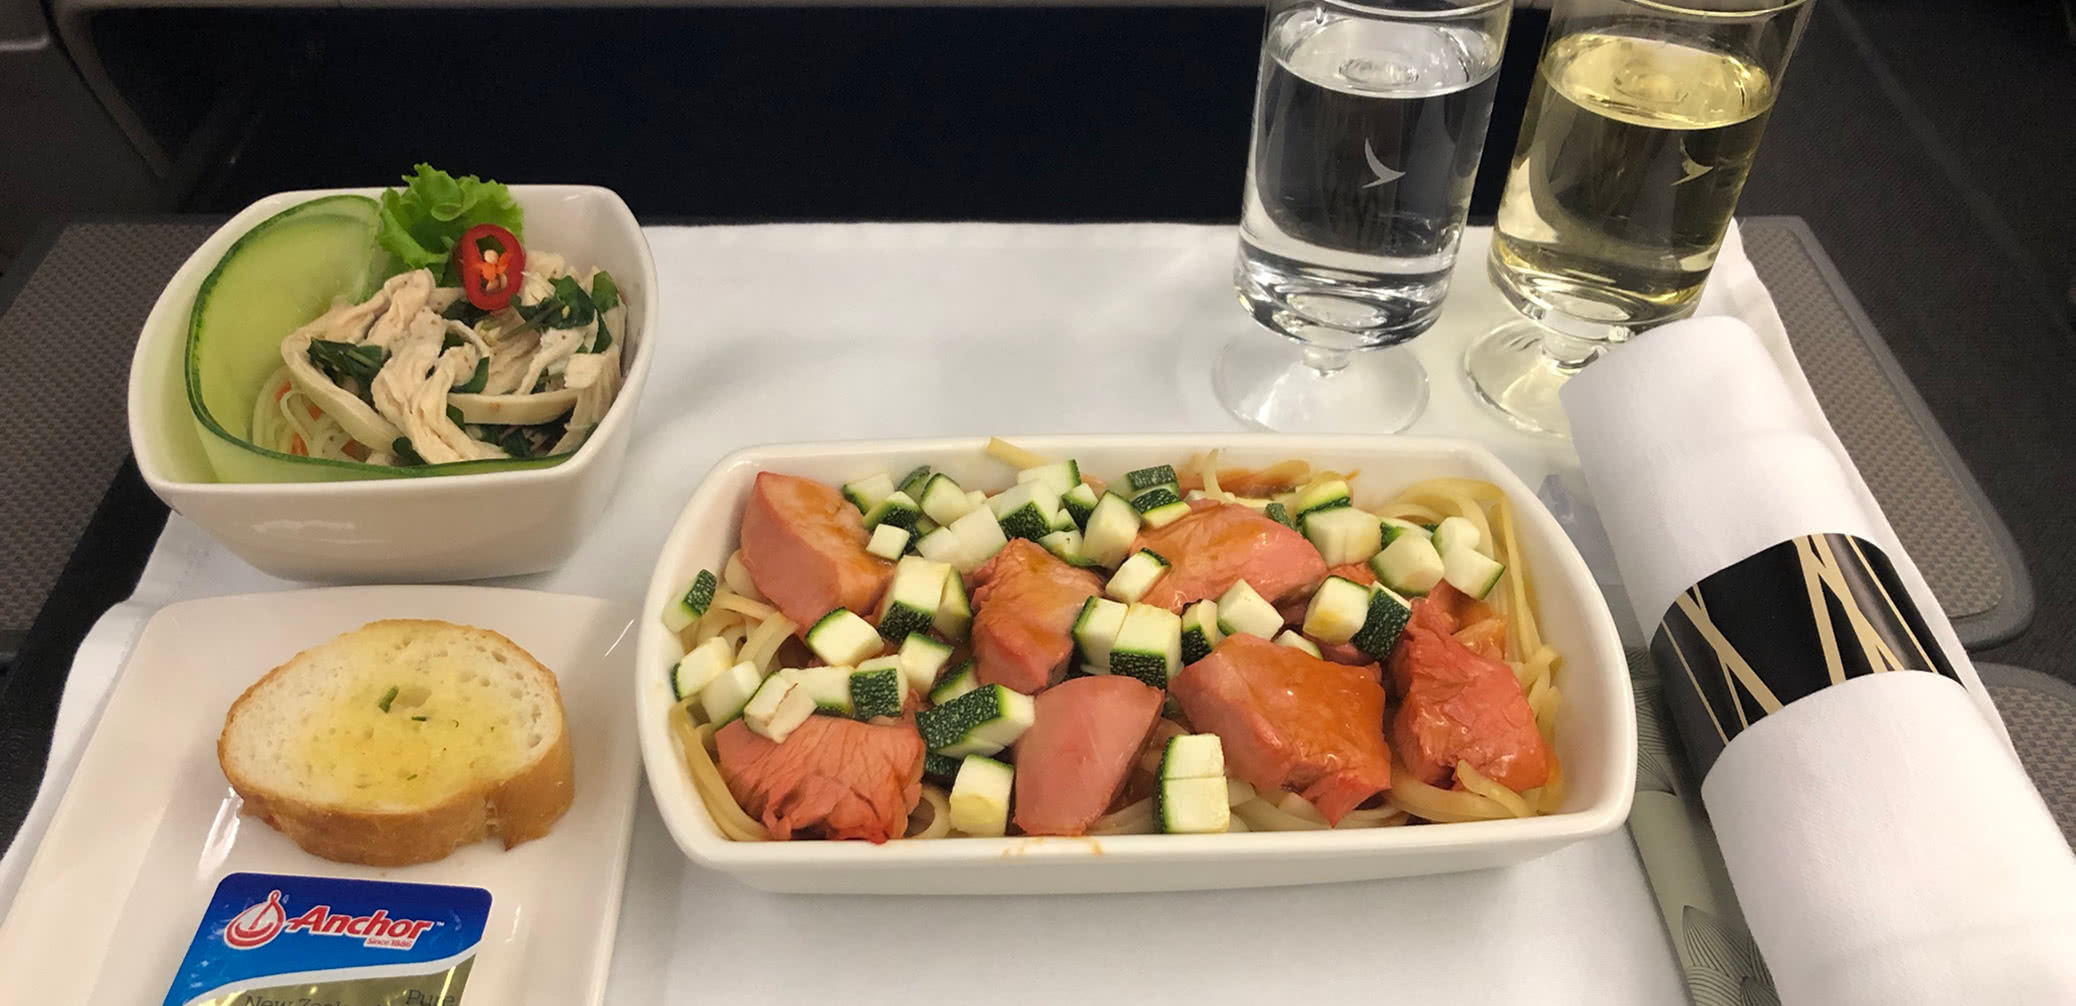 cathay-dragon-business-class-review-comparison-a320-vs-a321